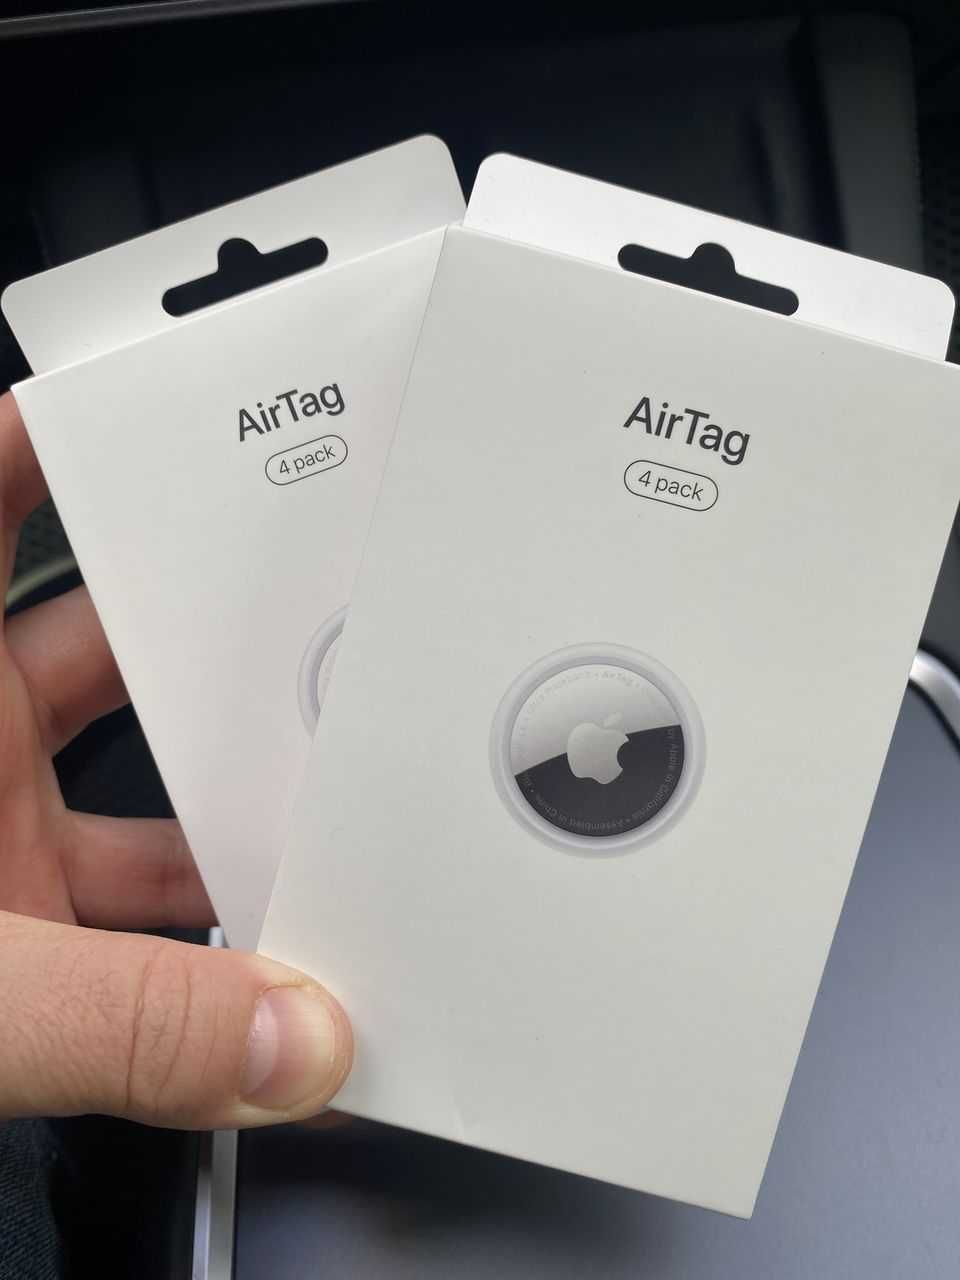 Apple AirTag 1 pack si 4 pack noi sigilate